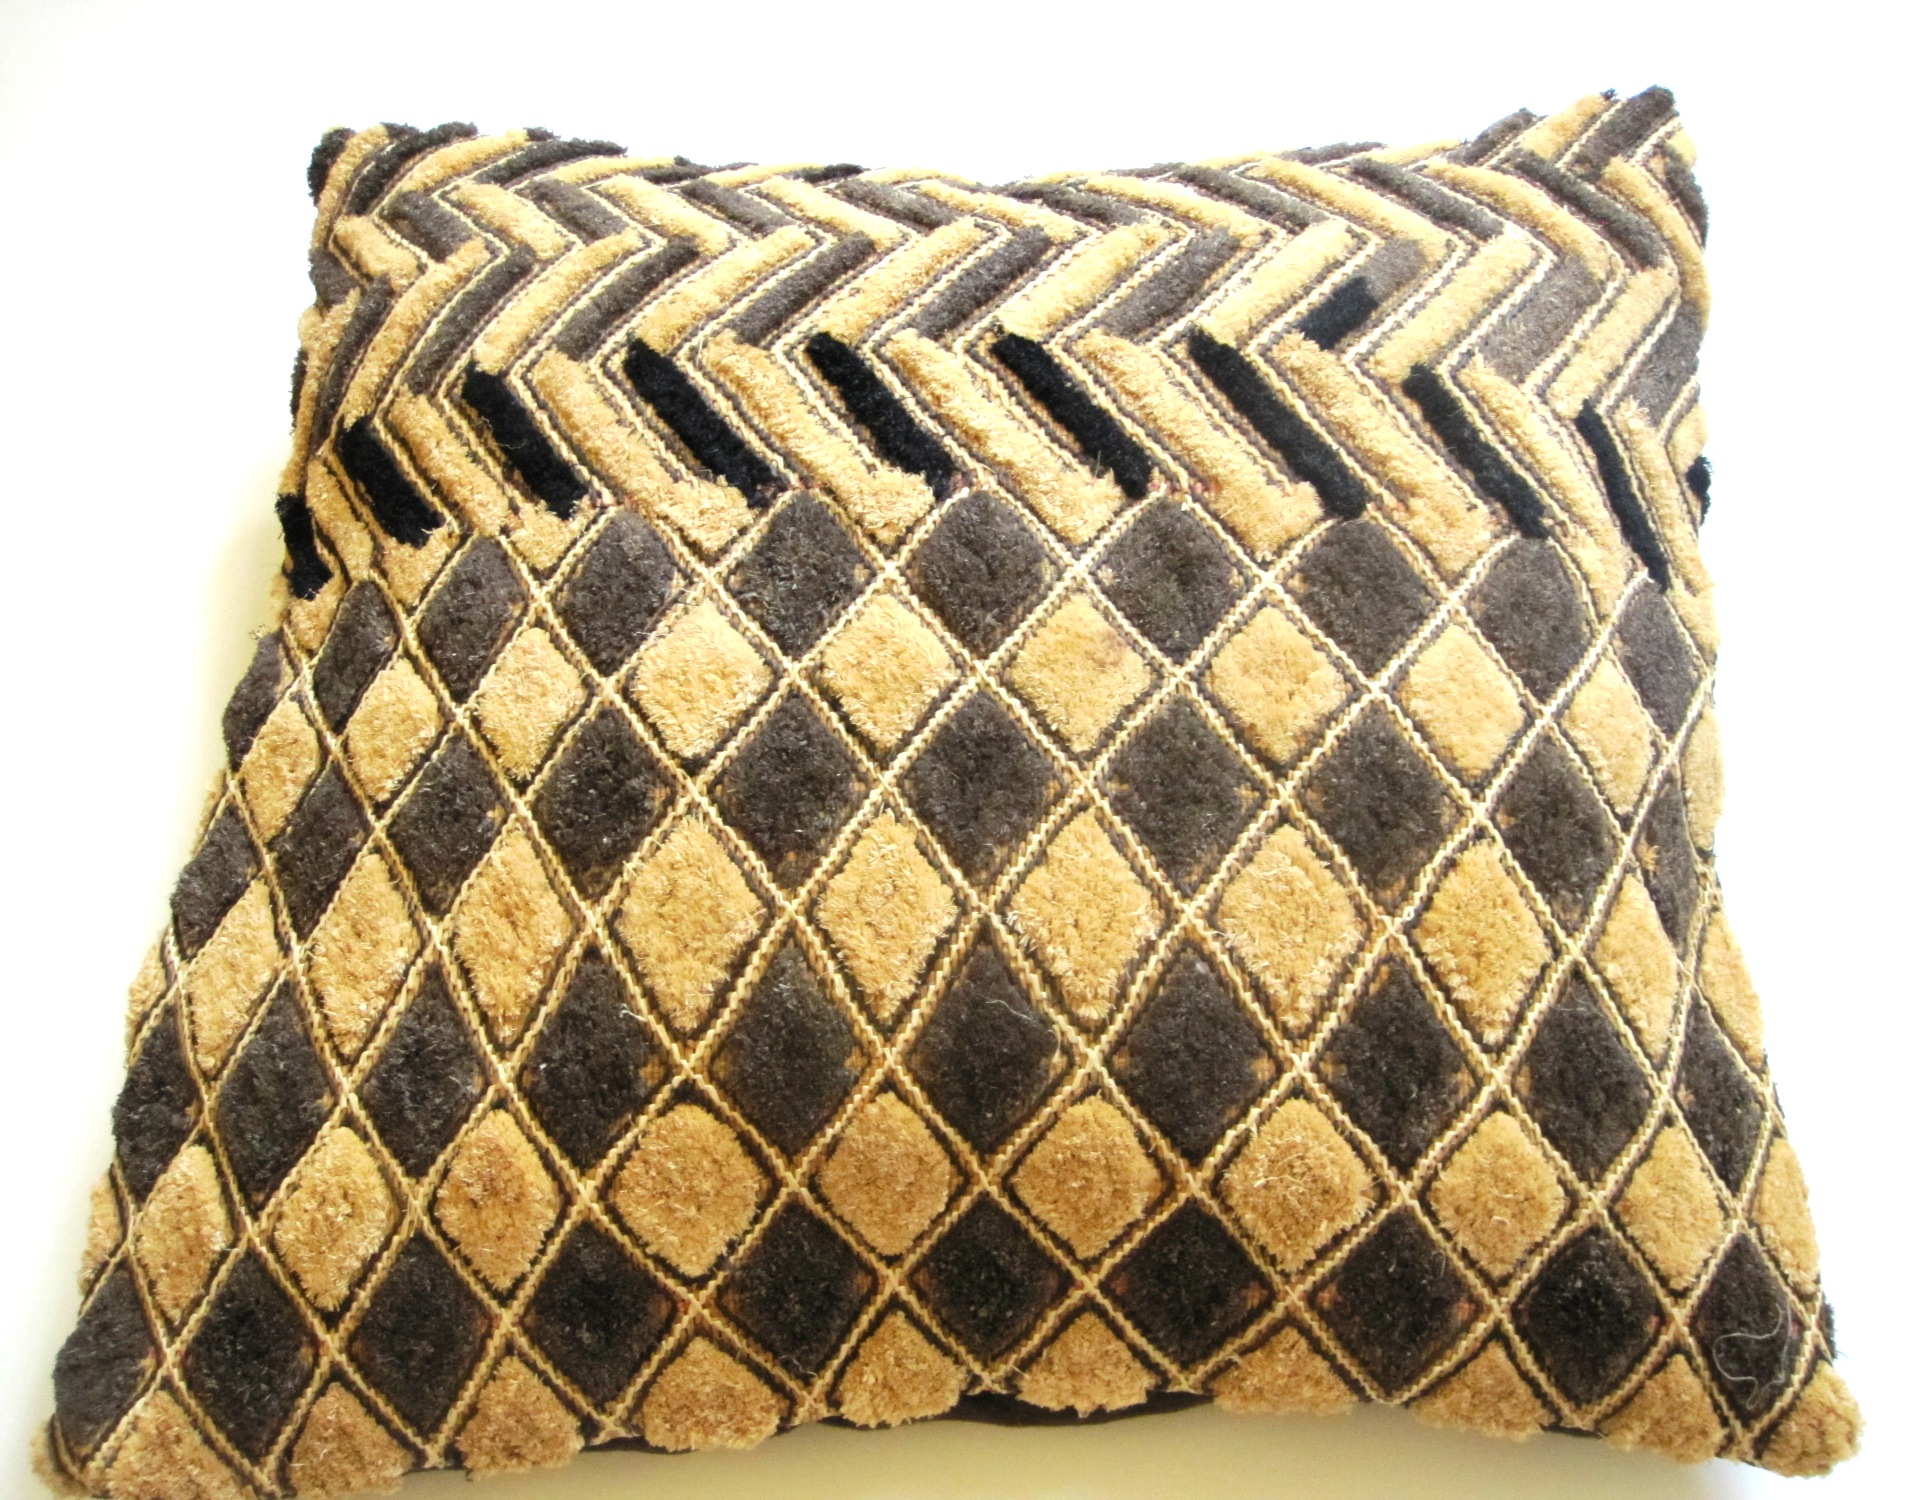 Pillow Cover handwoven from Shoowa textiles